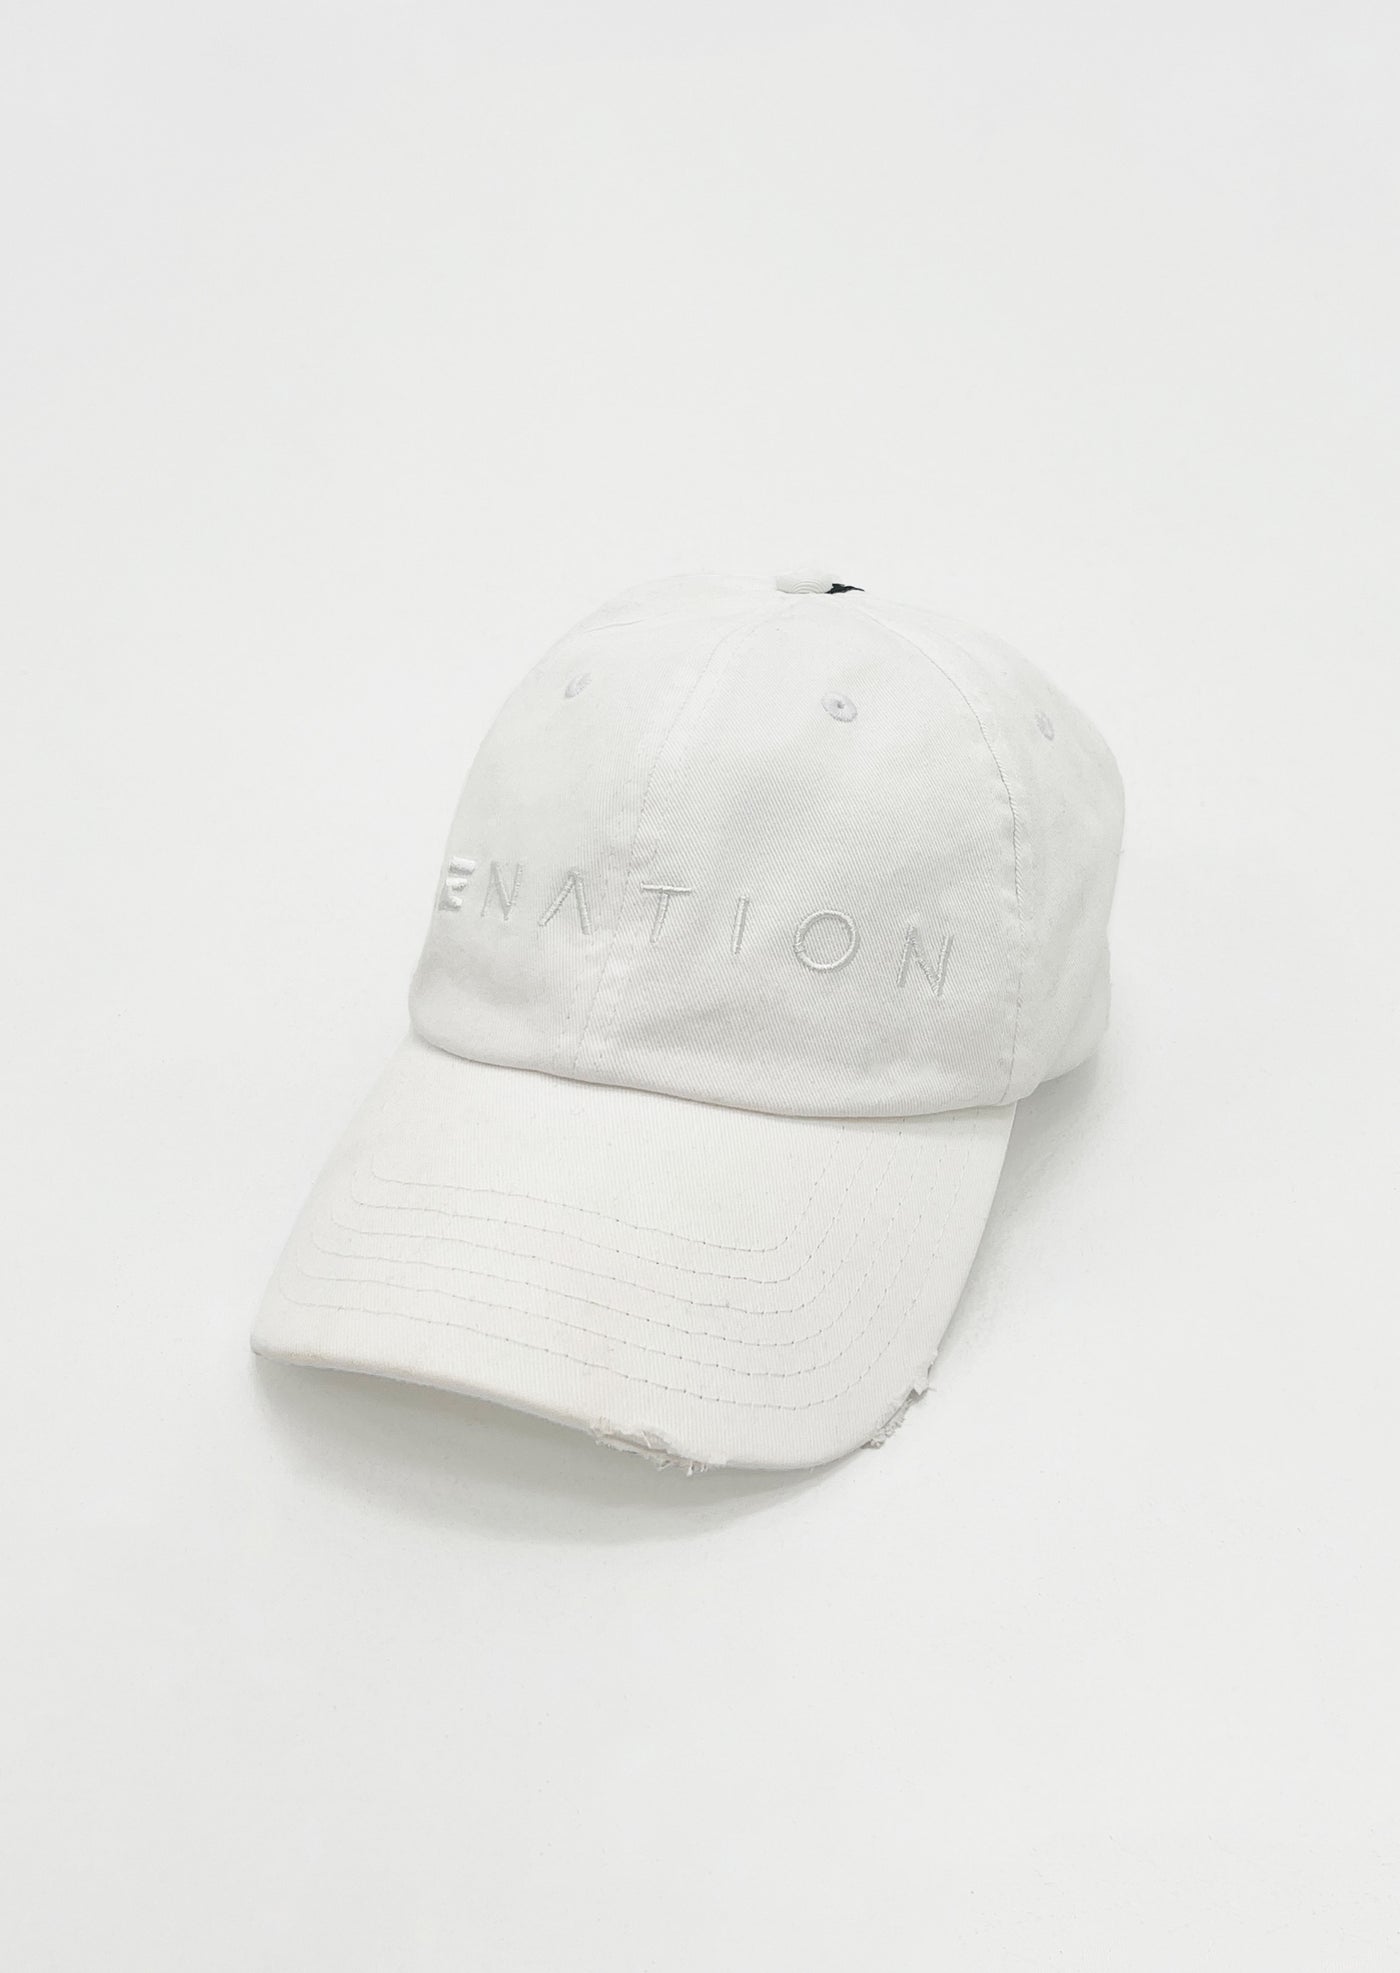 IMMERSION CAP IN OPTIC WHITE